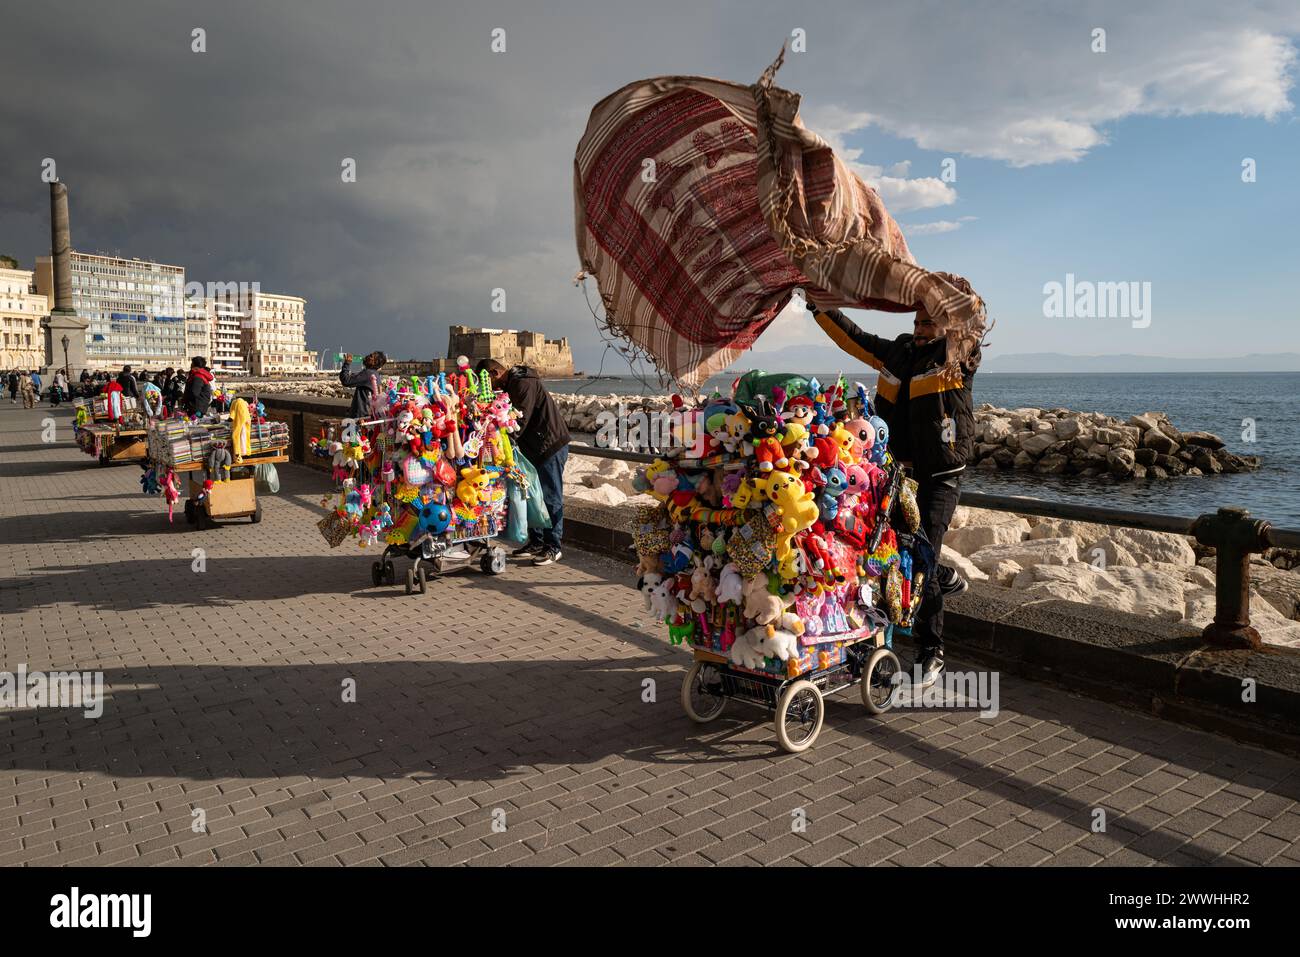 Storm approaches Naples coast causing street vendor to cover his stall catching his cover in the wind Stock Photo